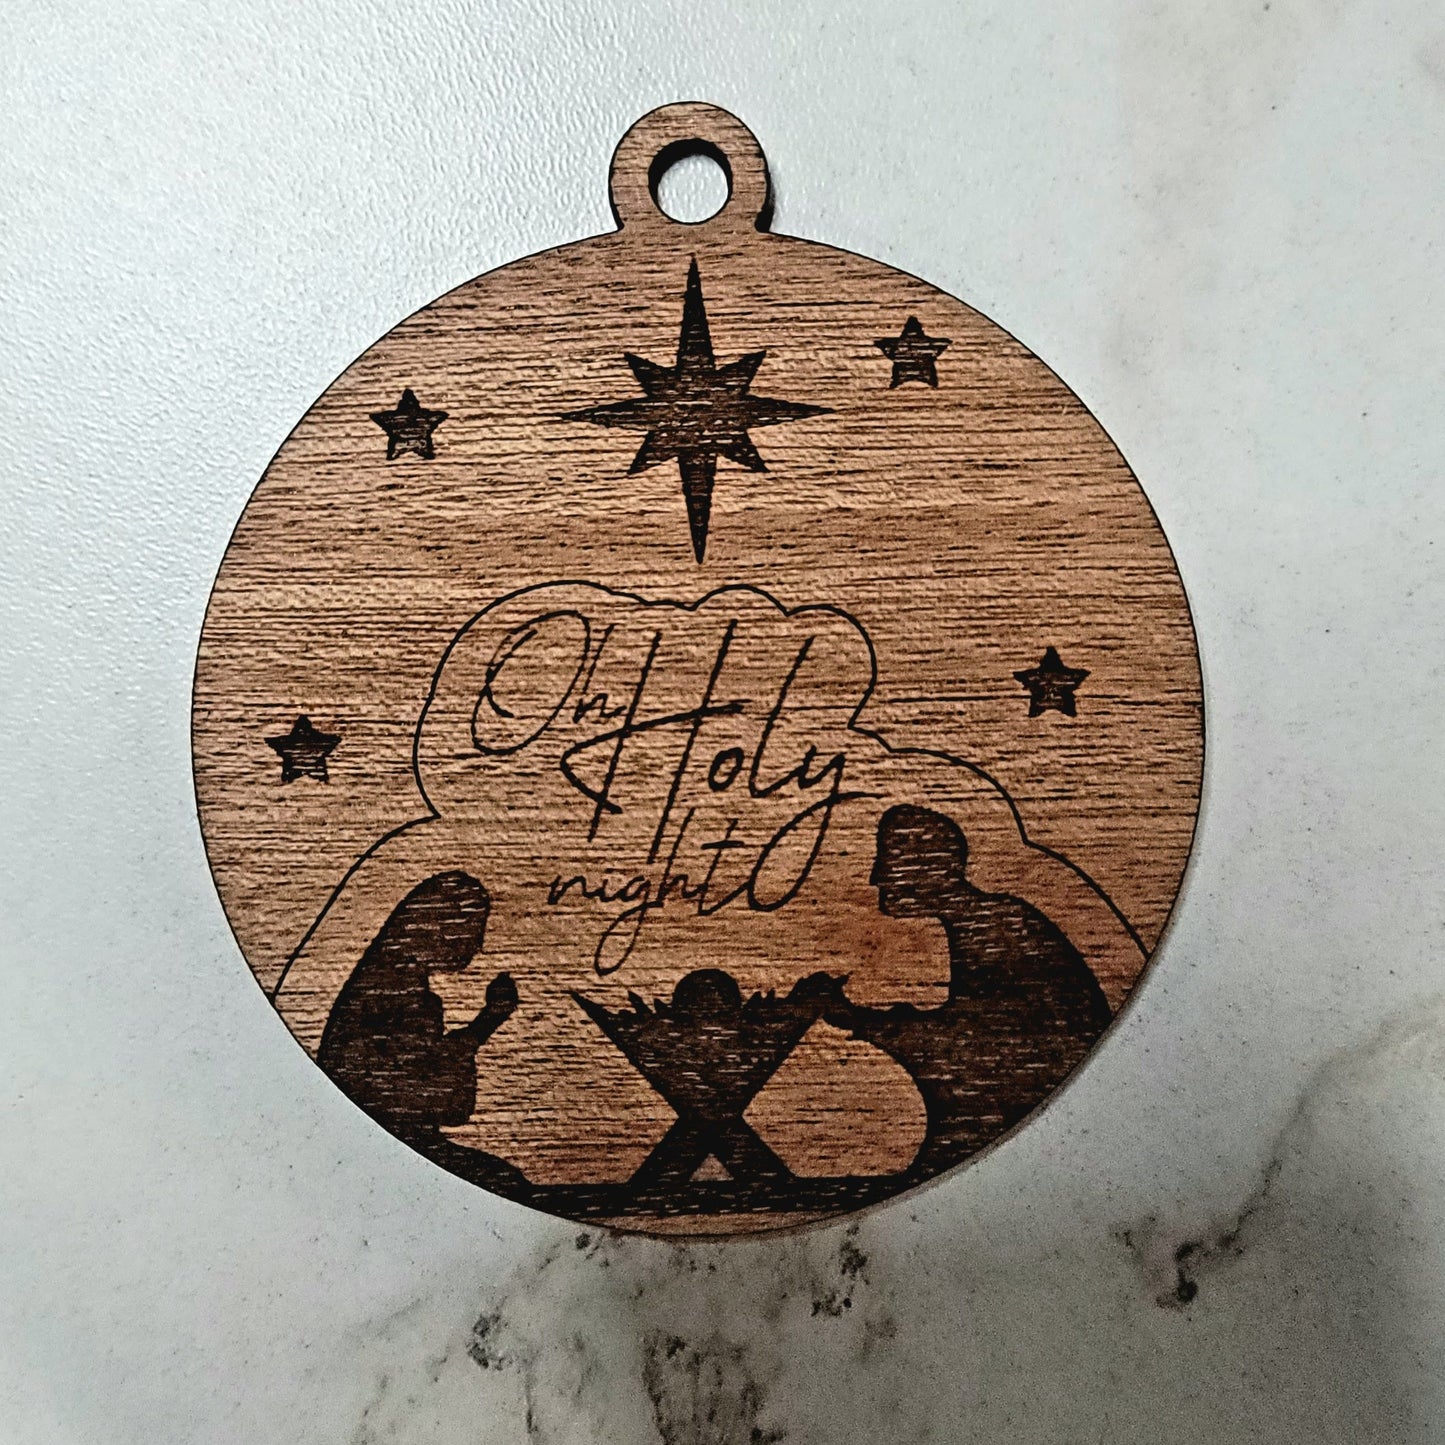 Oh Holy Night Christmas Ornament